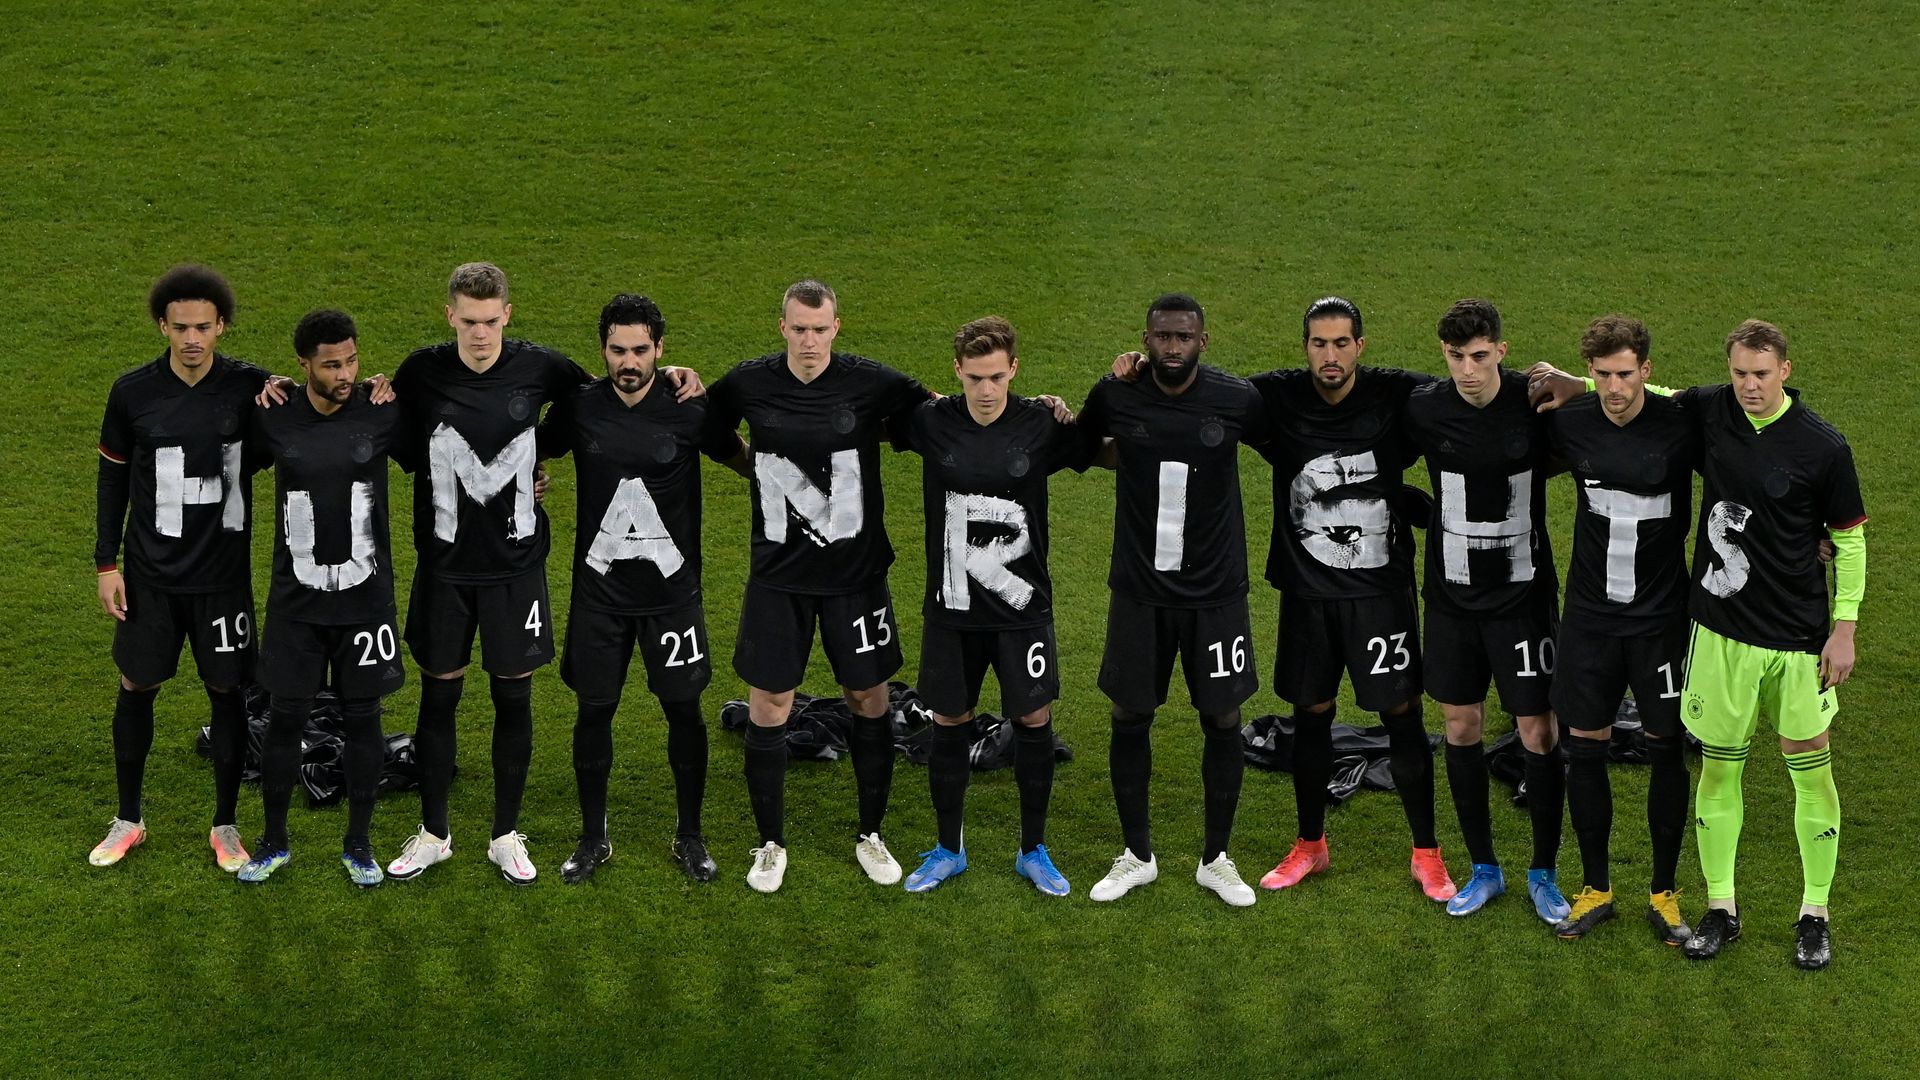 Germany's players pose for a group photo with the wording "Human rights" on their T-shirts prior to the FIFA World Cup Qatar 2022 qualification football match  v Iceland in Duisburg in 2021. 